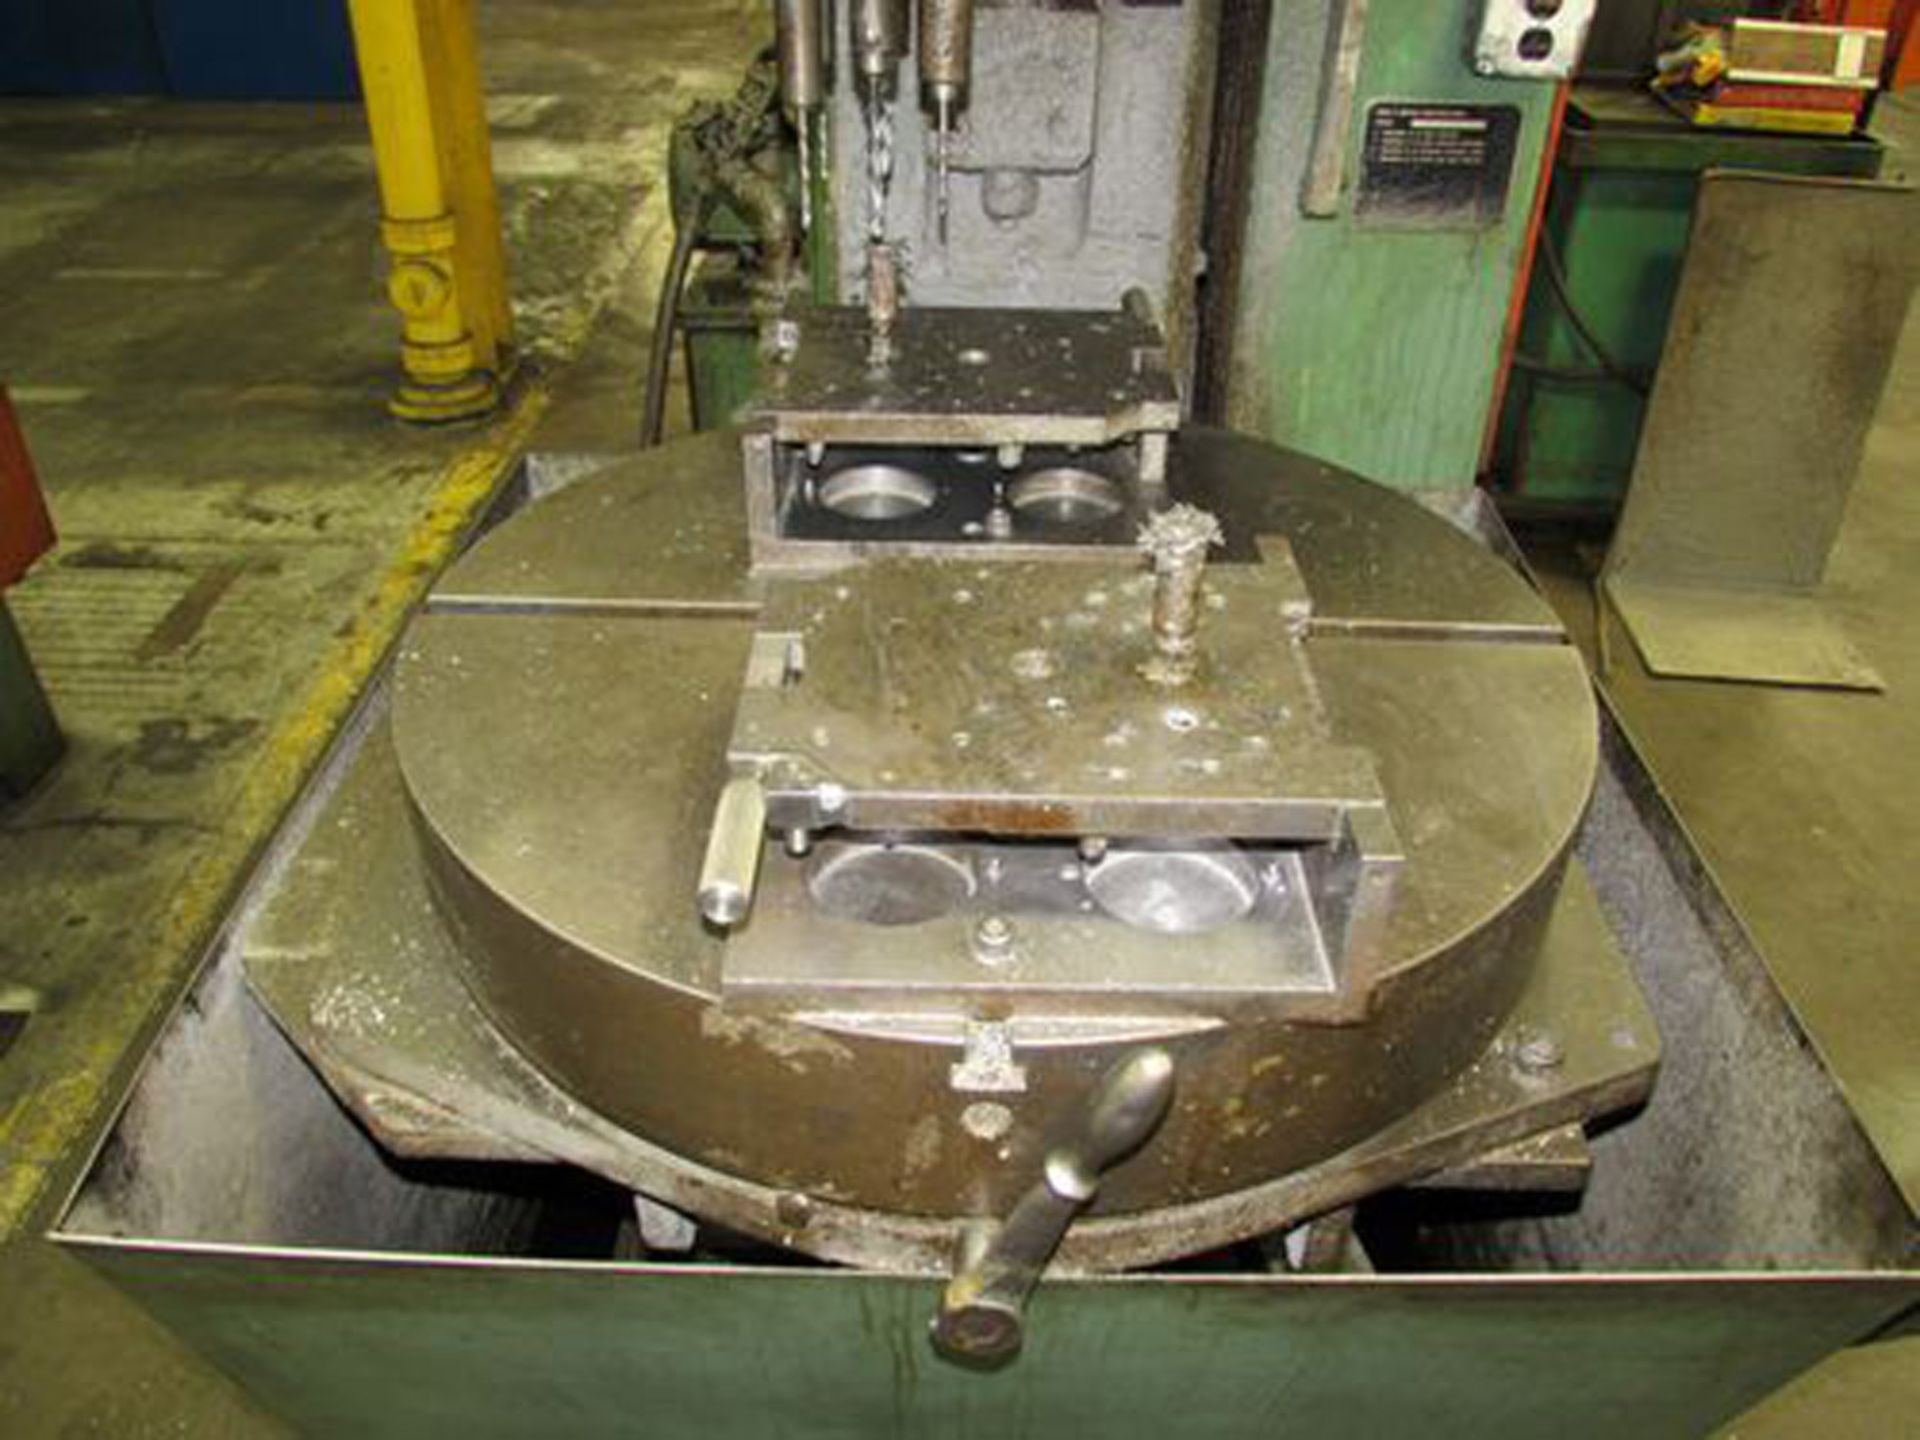 Natco Holesteel Multiple Spindle Drill, 24 Spindle Drivers - 8 Spindles, Mdl: G210, S/N: G210-149 ( - Image 5 of 6